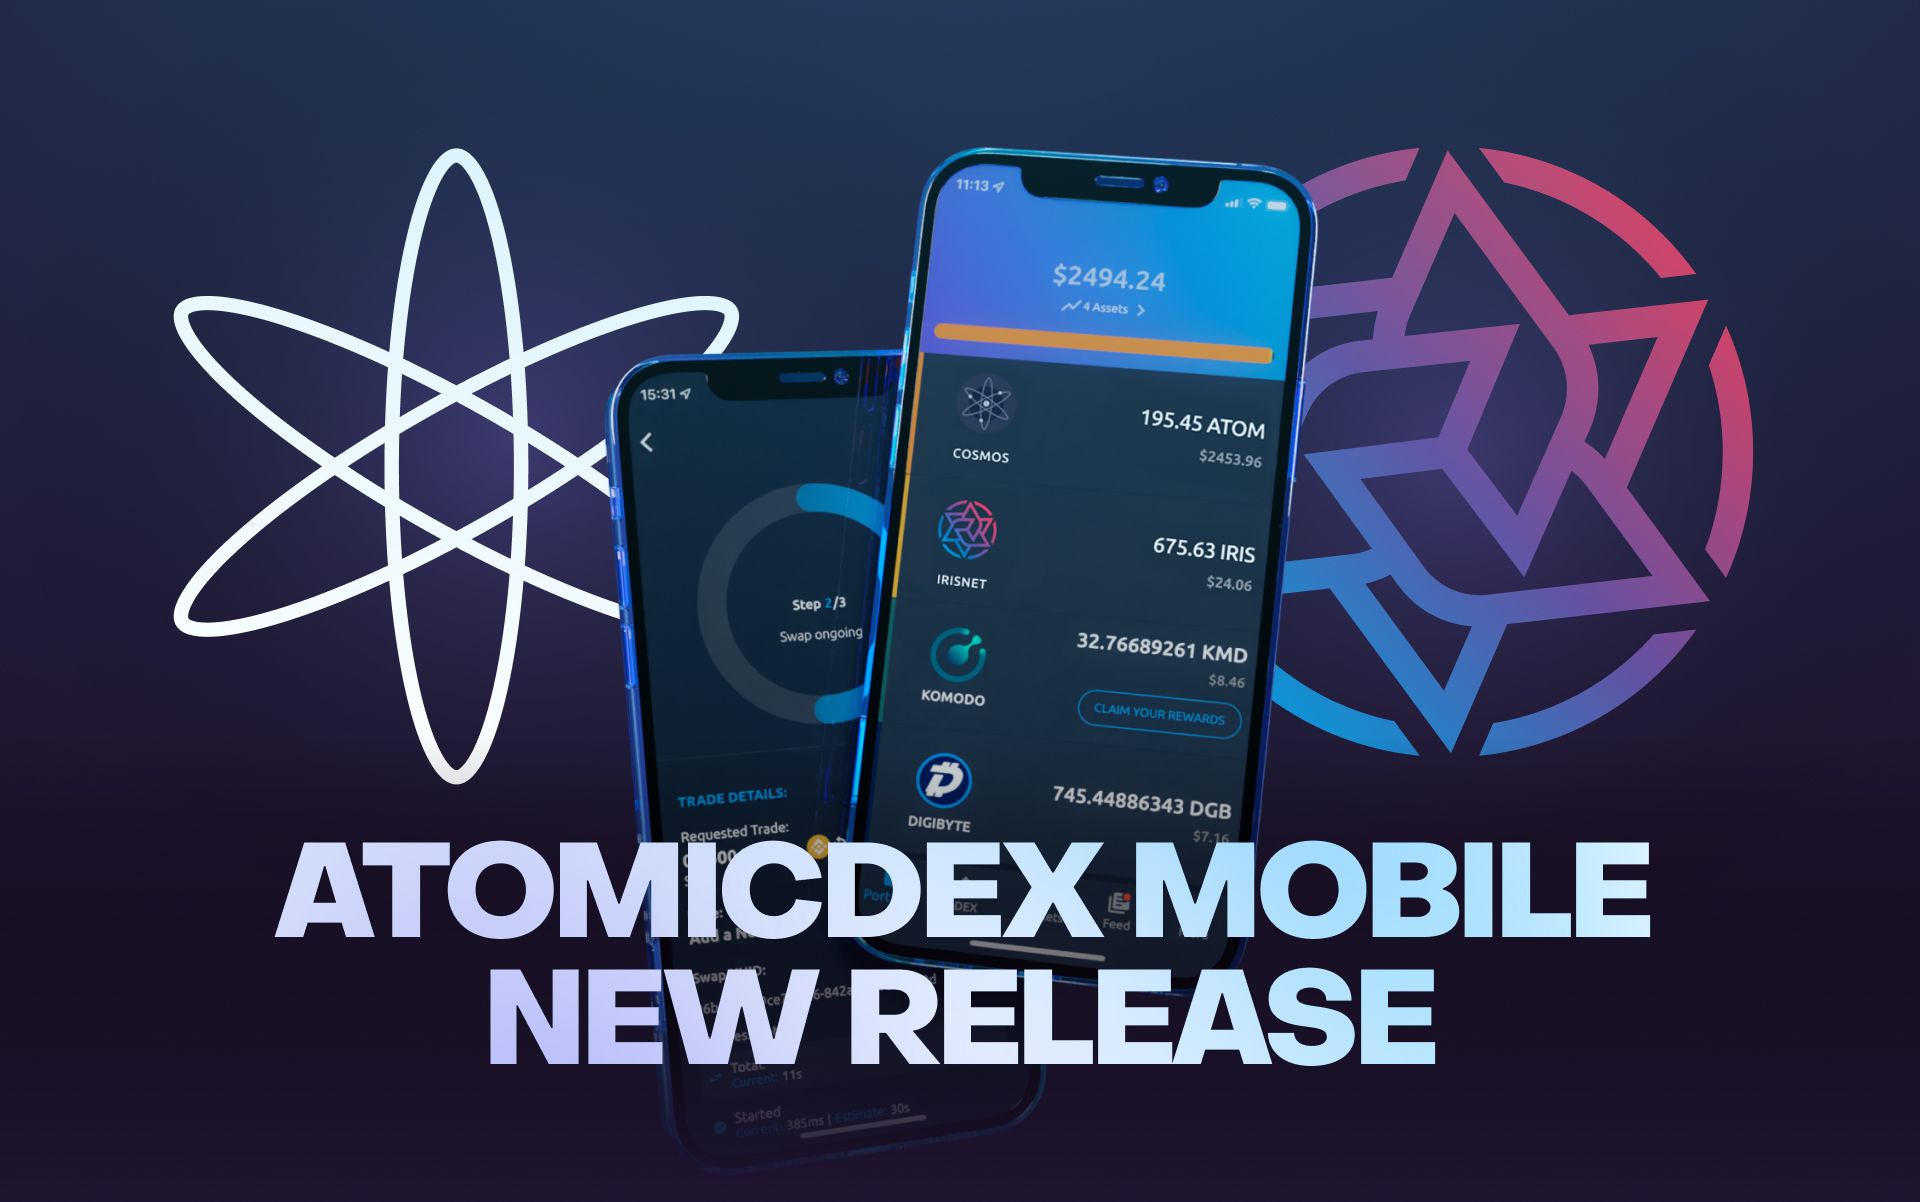 AtomicDEX Mobile v0.6.1 Is Now Live